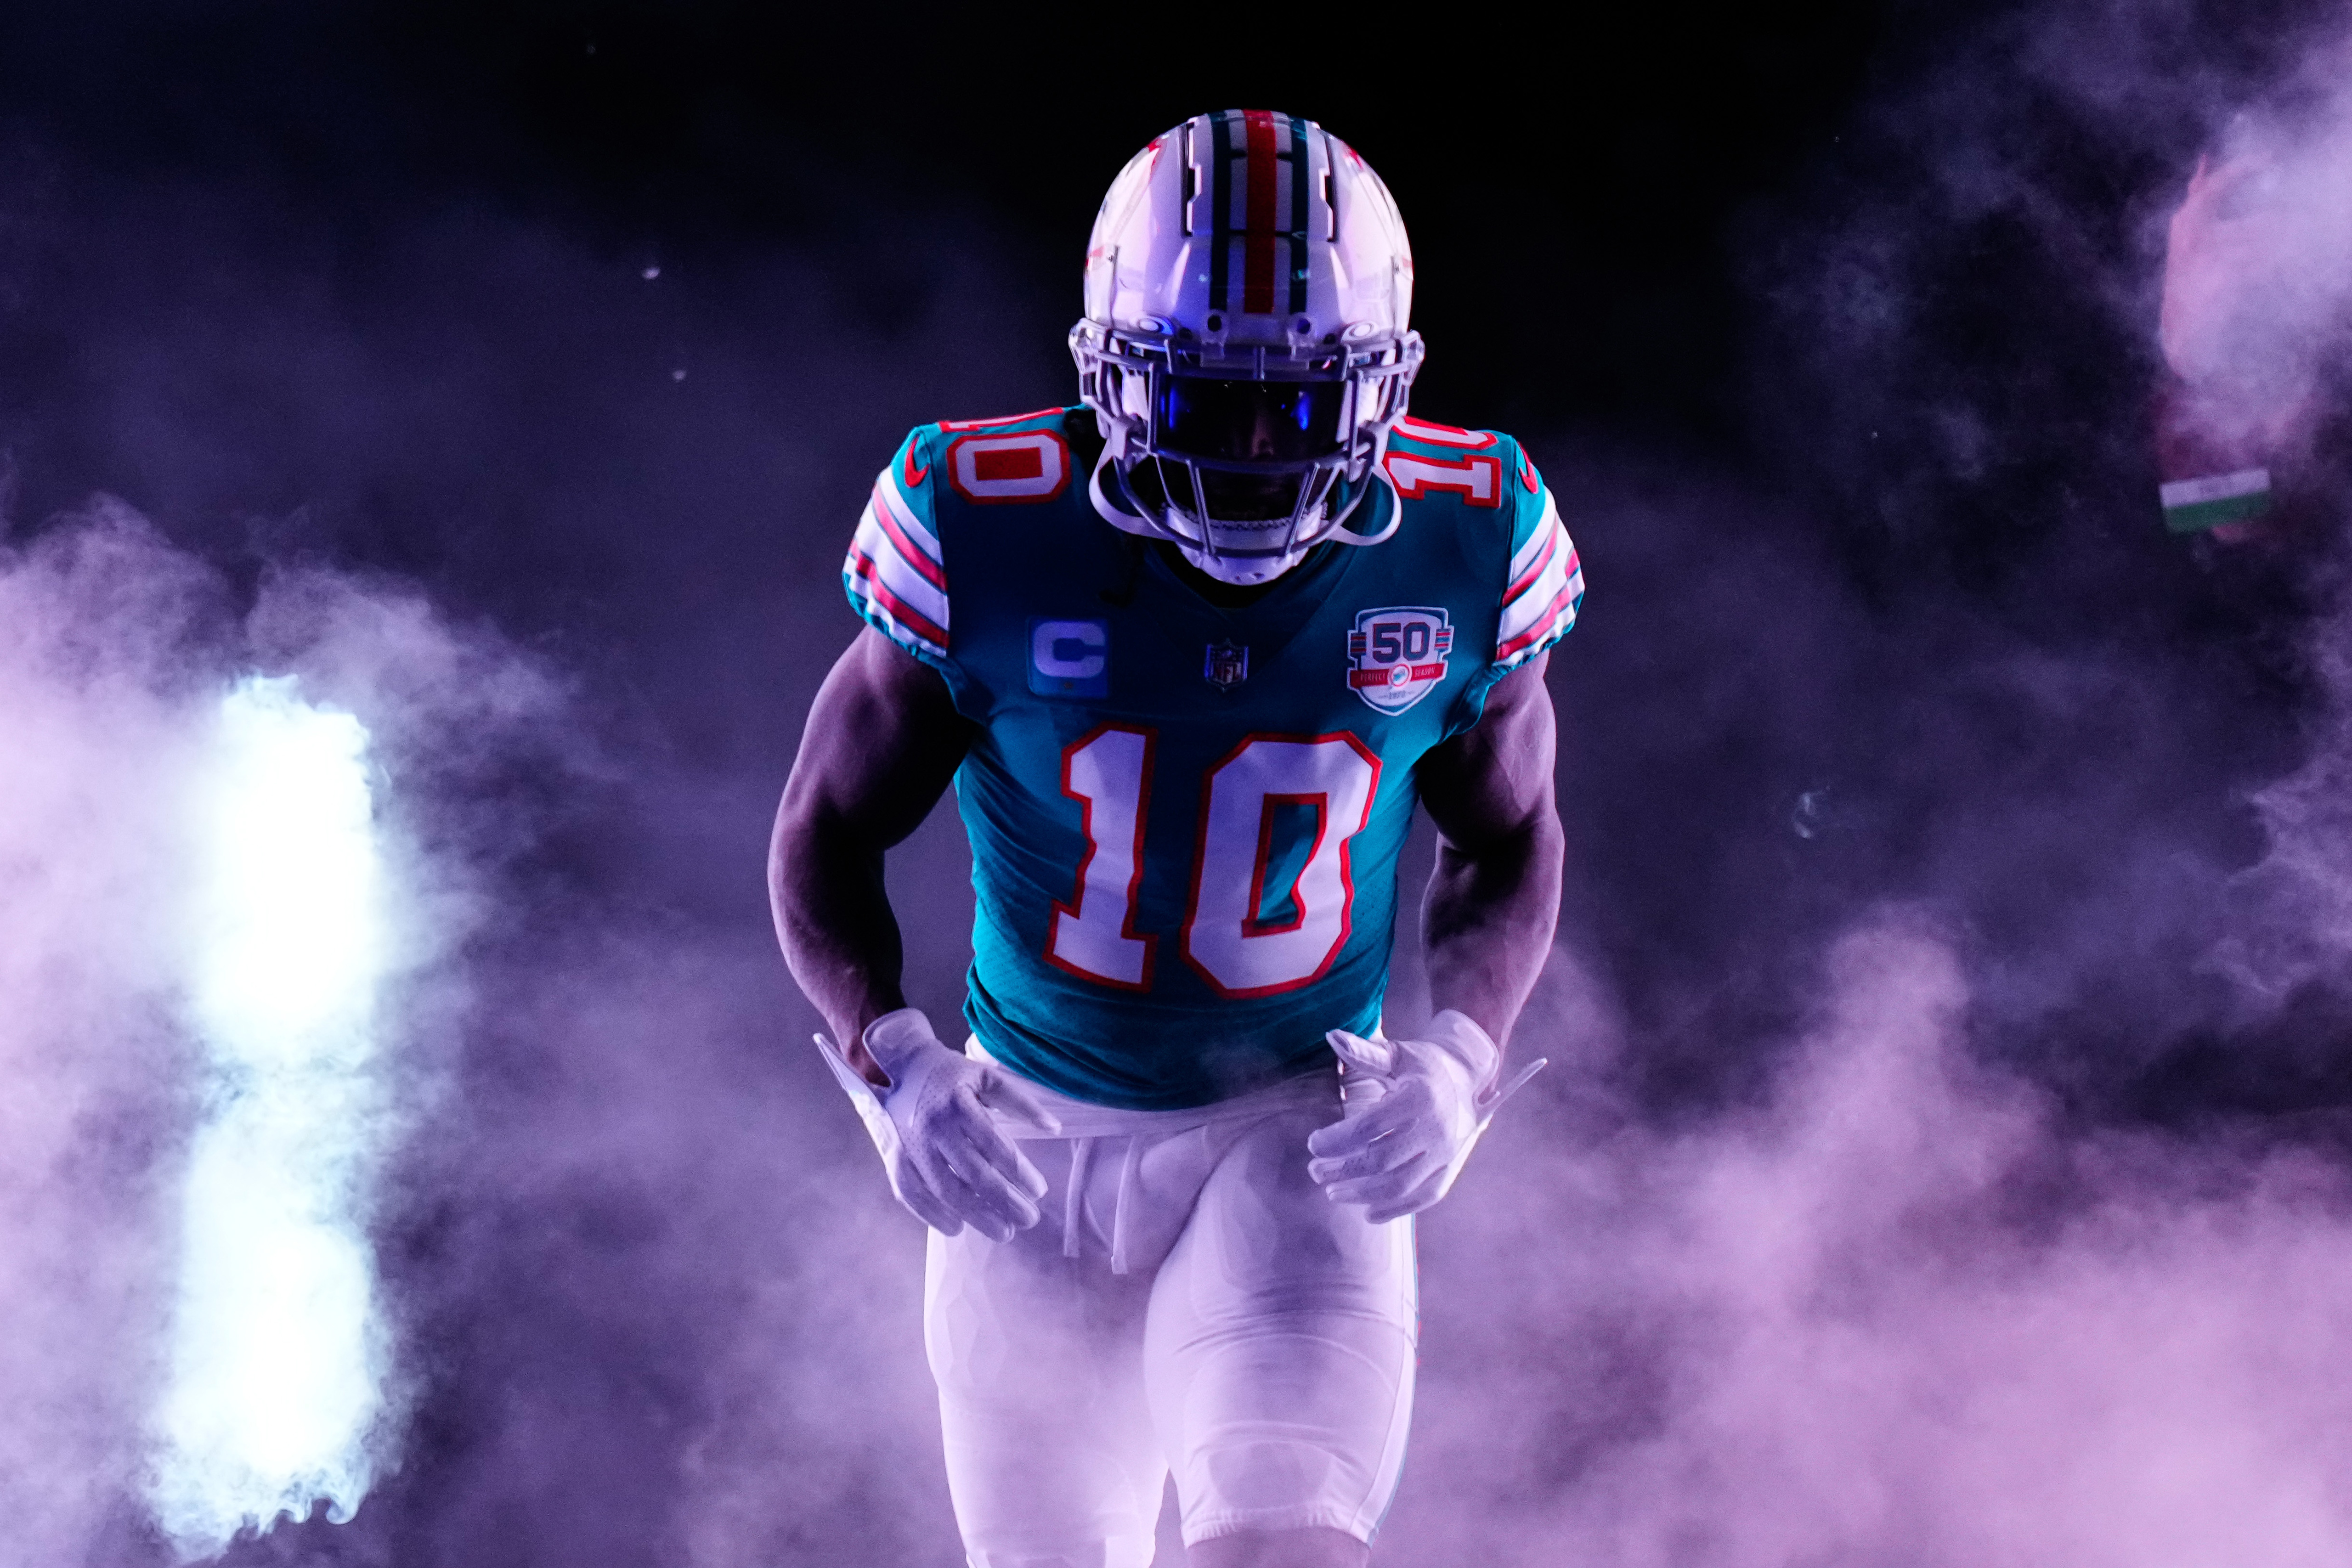 Background Tyreek Hill Wallpaper Discover more American Football League  Miami Dolphins National S  Football helmets Miami dolphins wallpaper  Football league